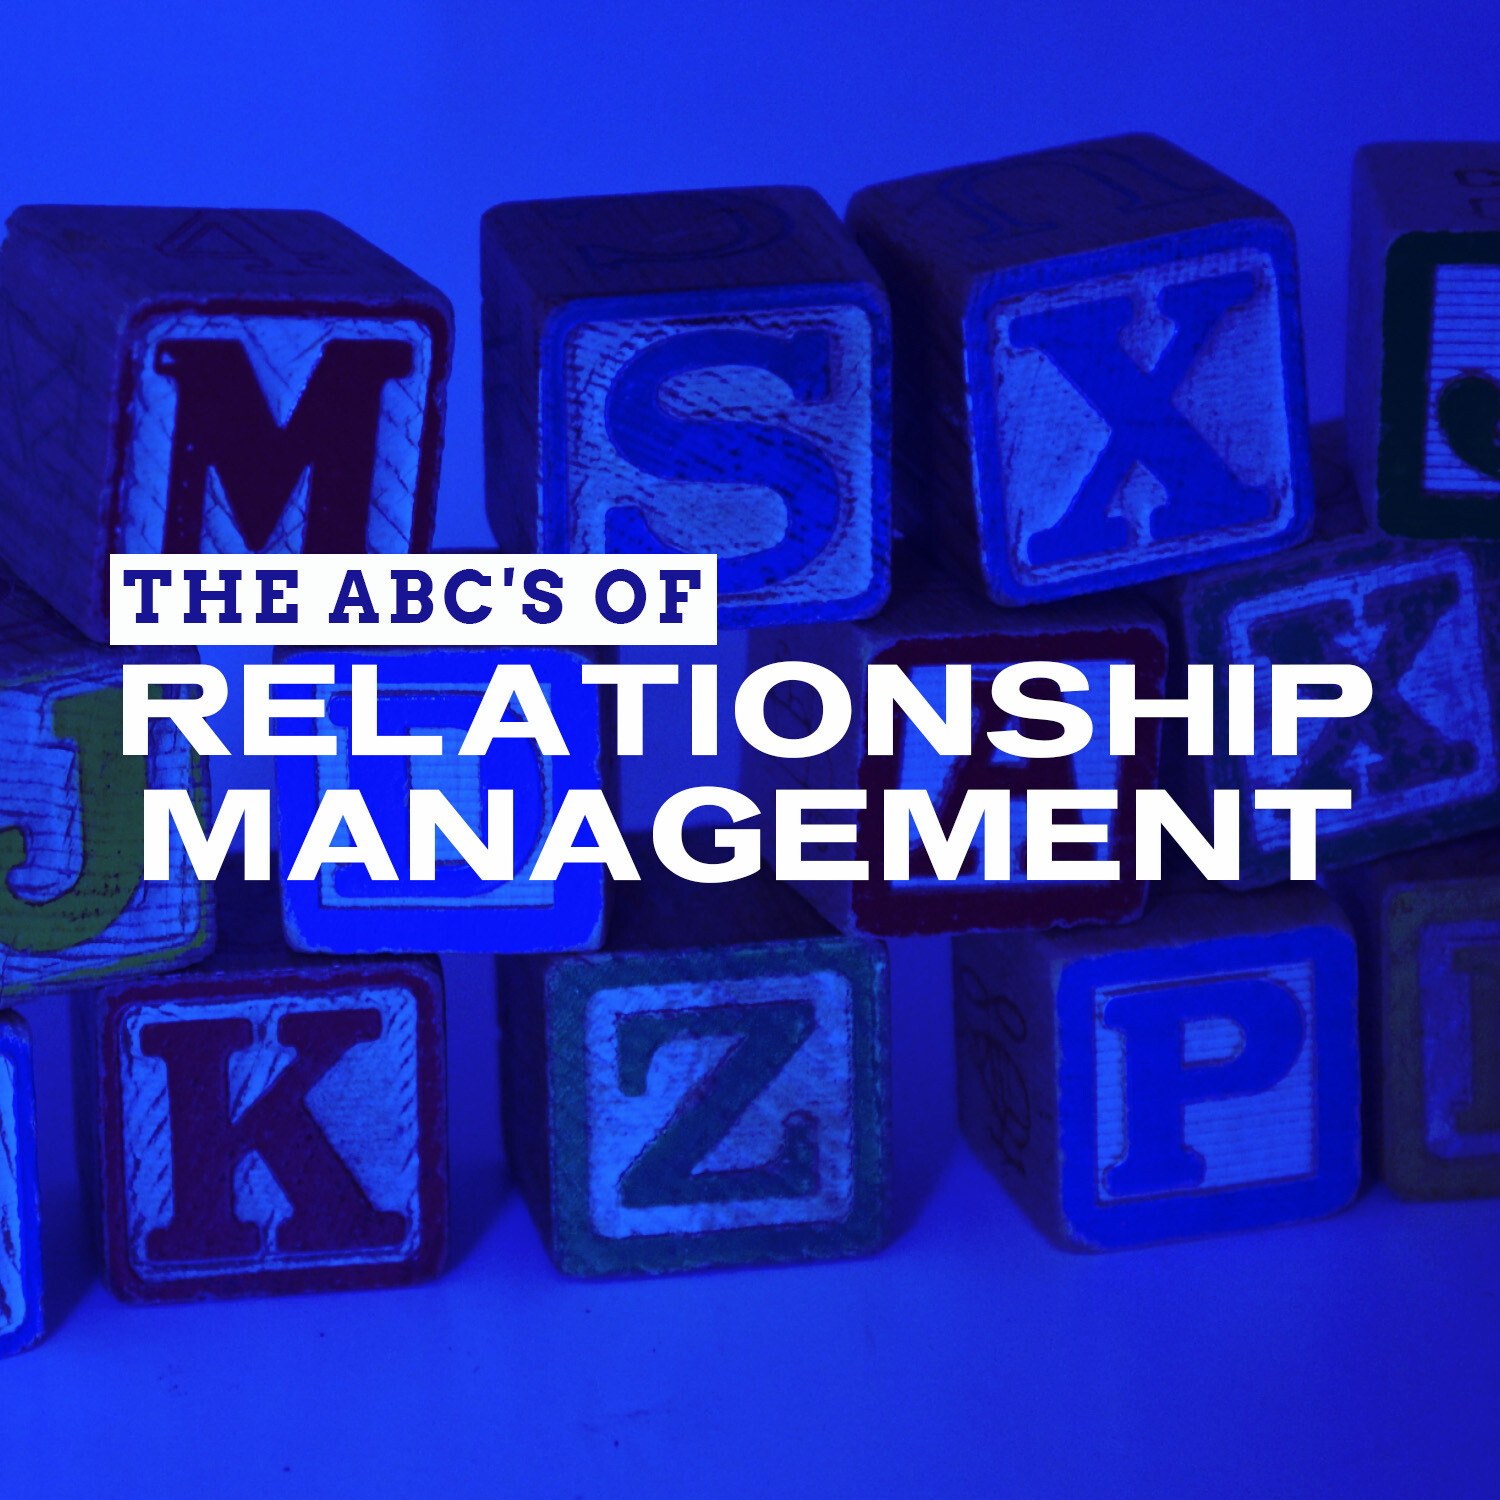 The ABC's of Relationship Management Part 3 | Bishop Herbert & Dr. Marcia Bailey